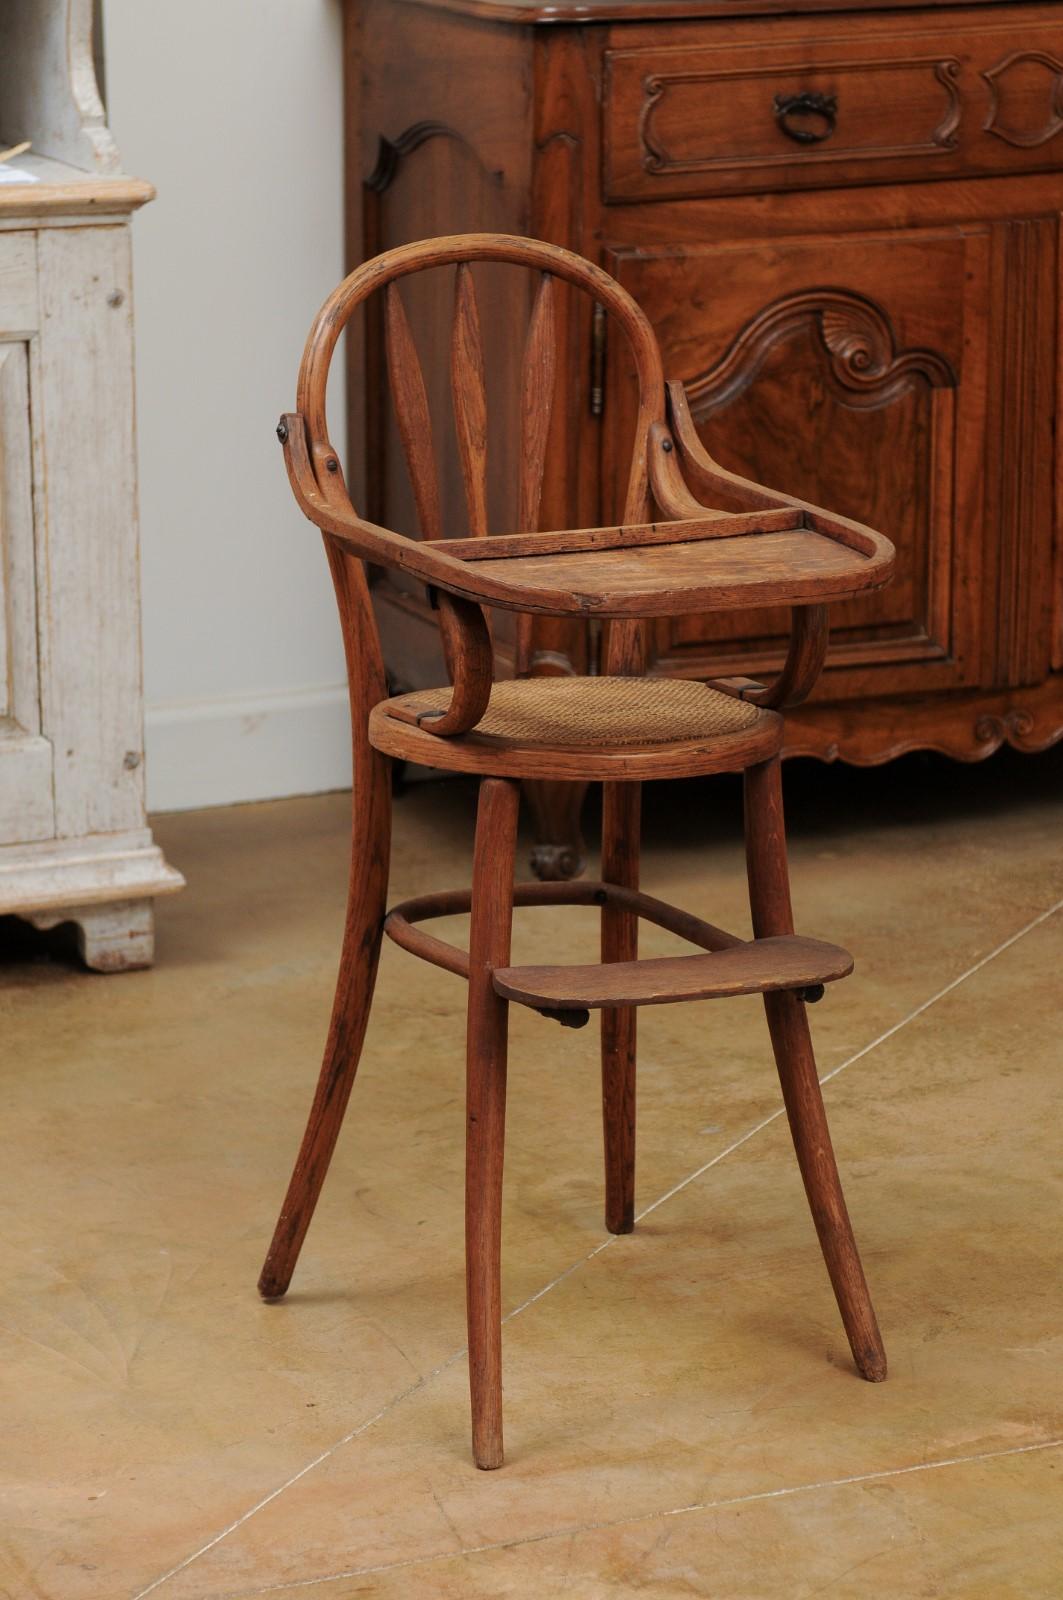 A French baby's high chair from the 19th century, with cane seat and weathered patina. Created in France during the 19th century, this high chair charms us with its rustic appeal and grand simplicity. The curving backrest is connected to two simply